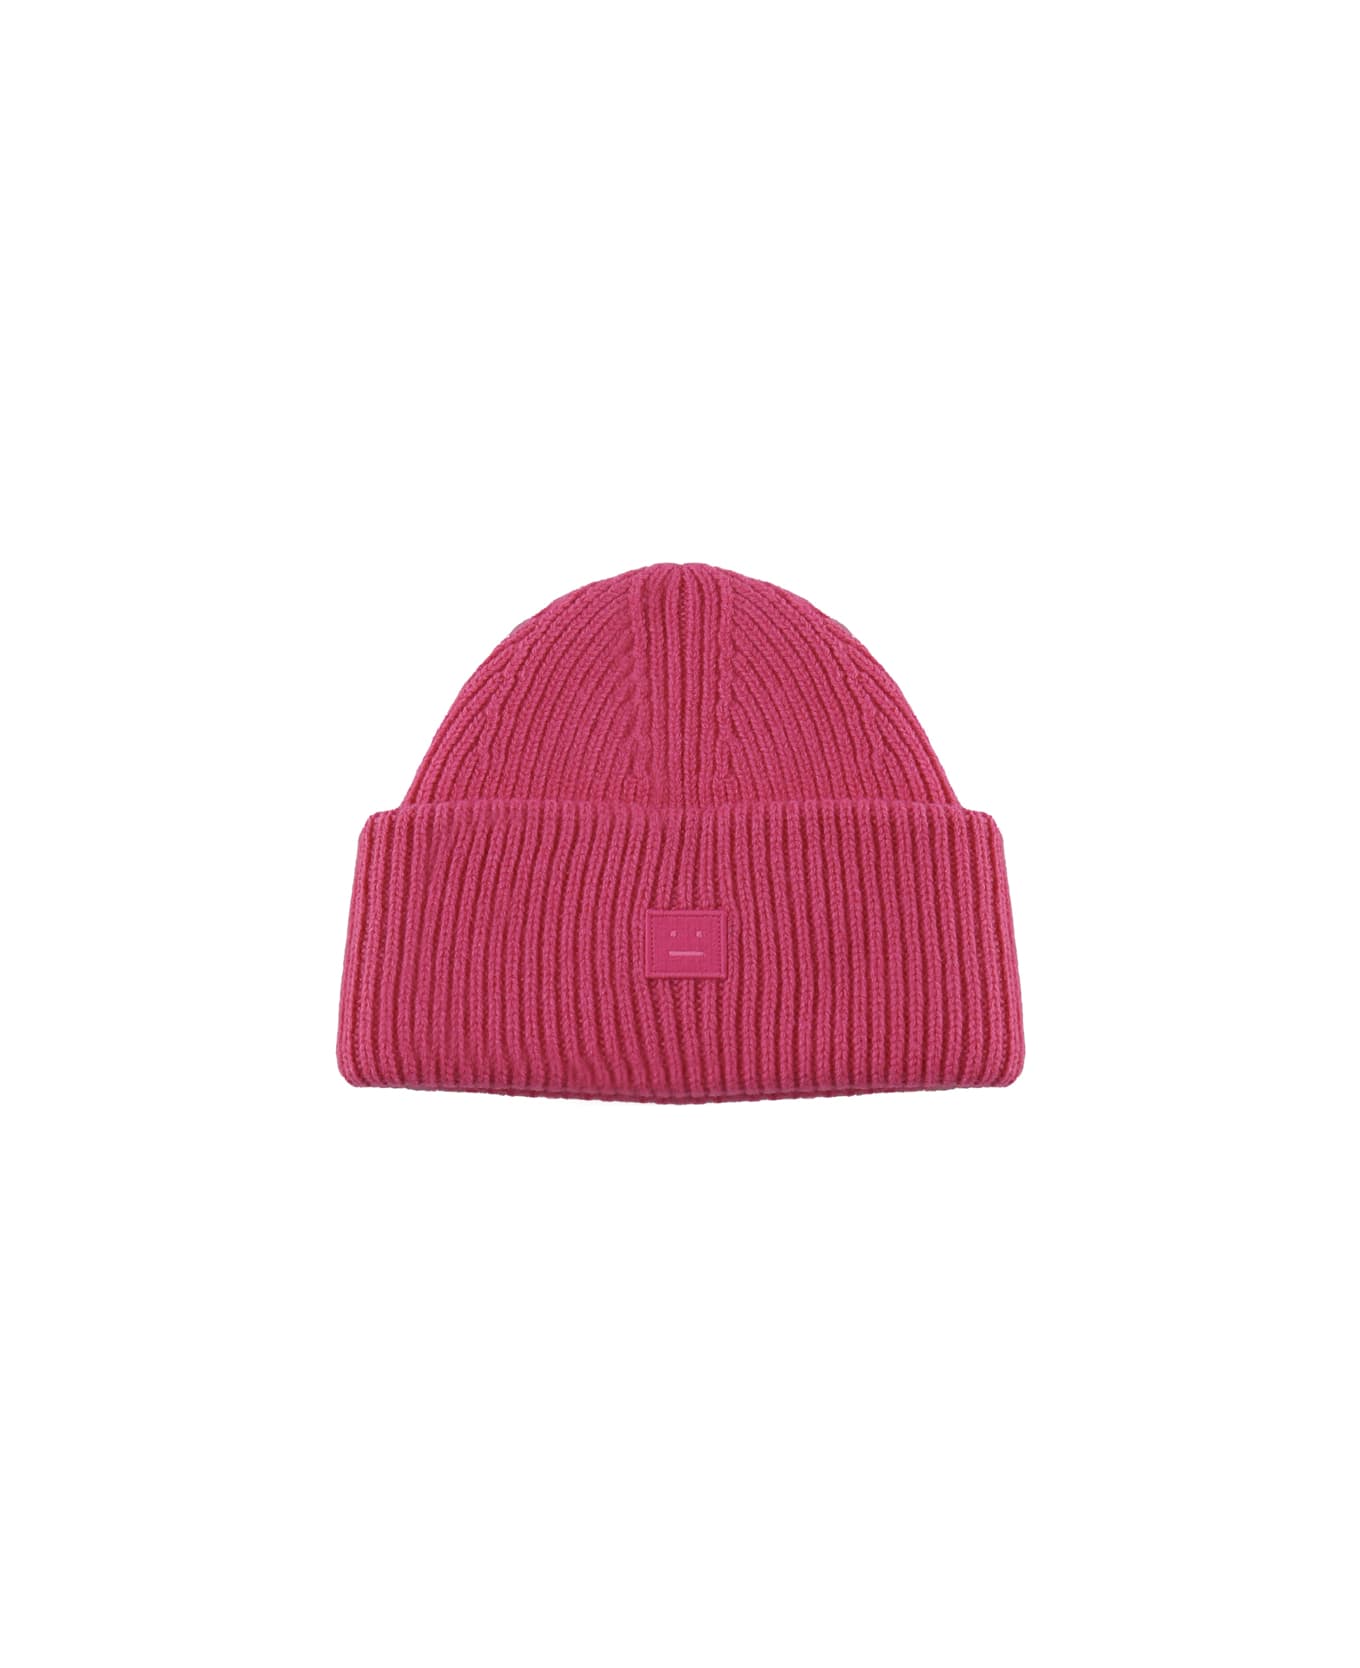 Acne Studios Beanie With Small Smiley Logo - Pink